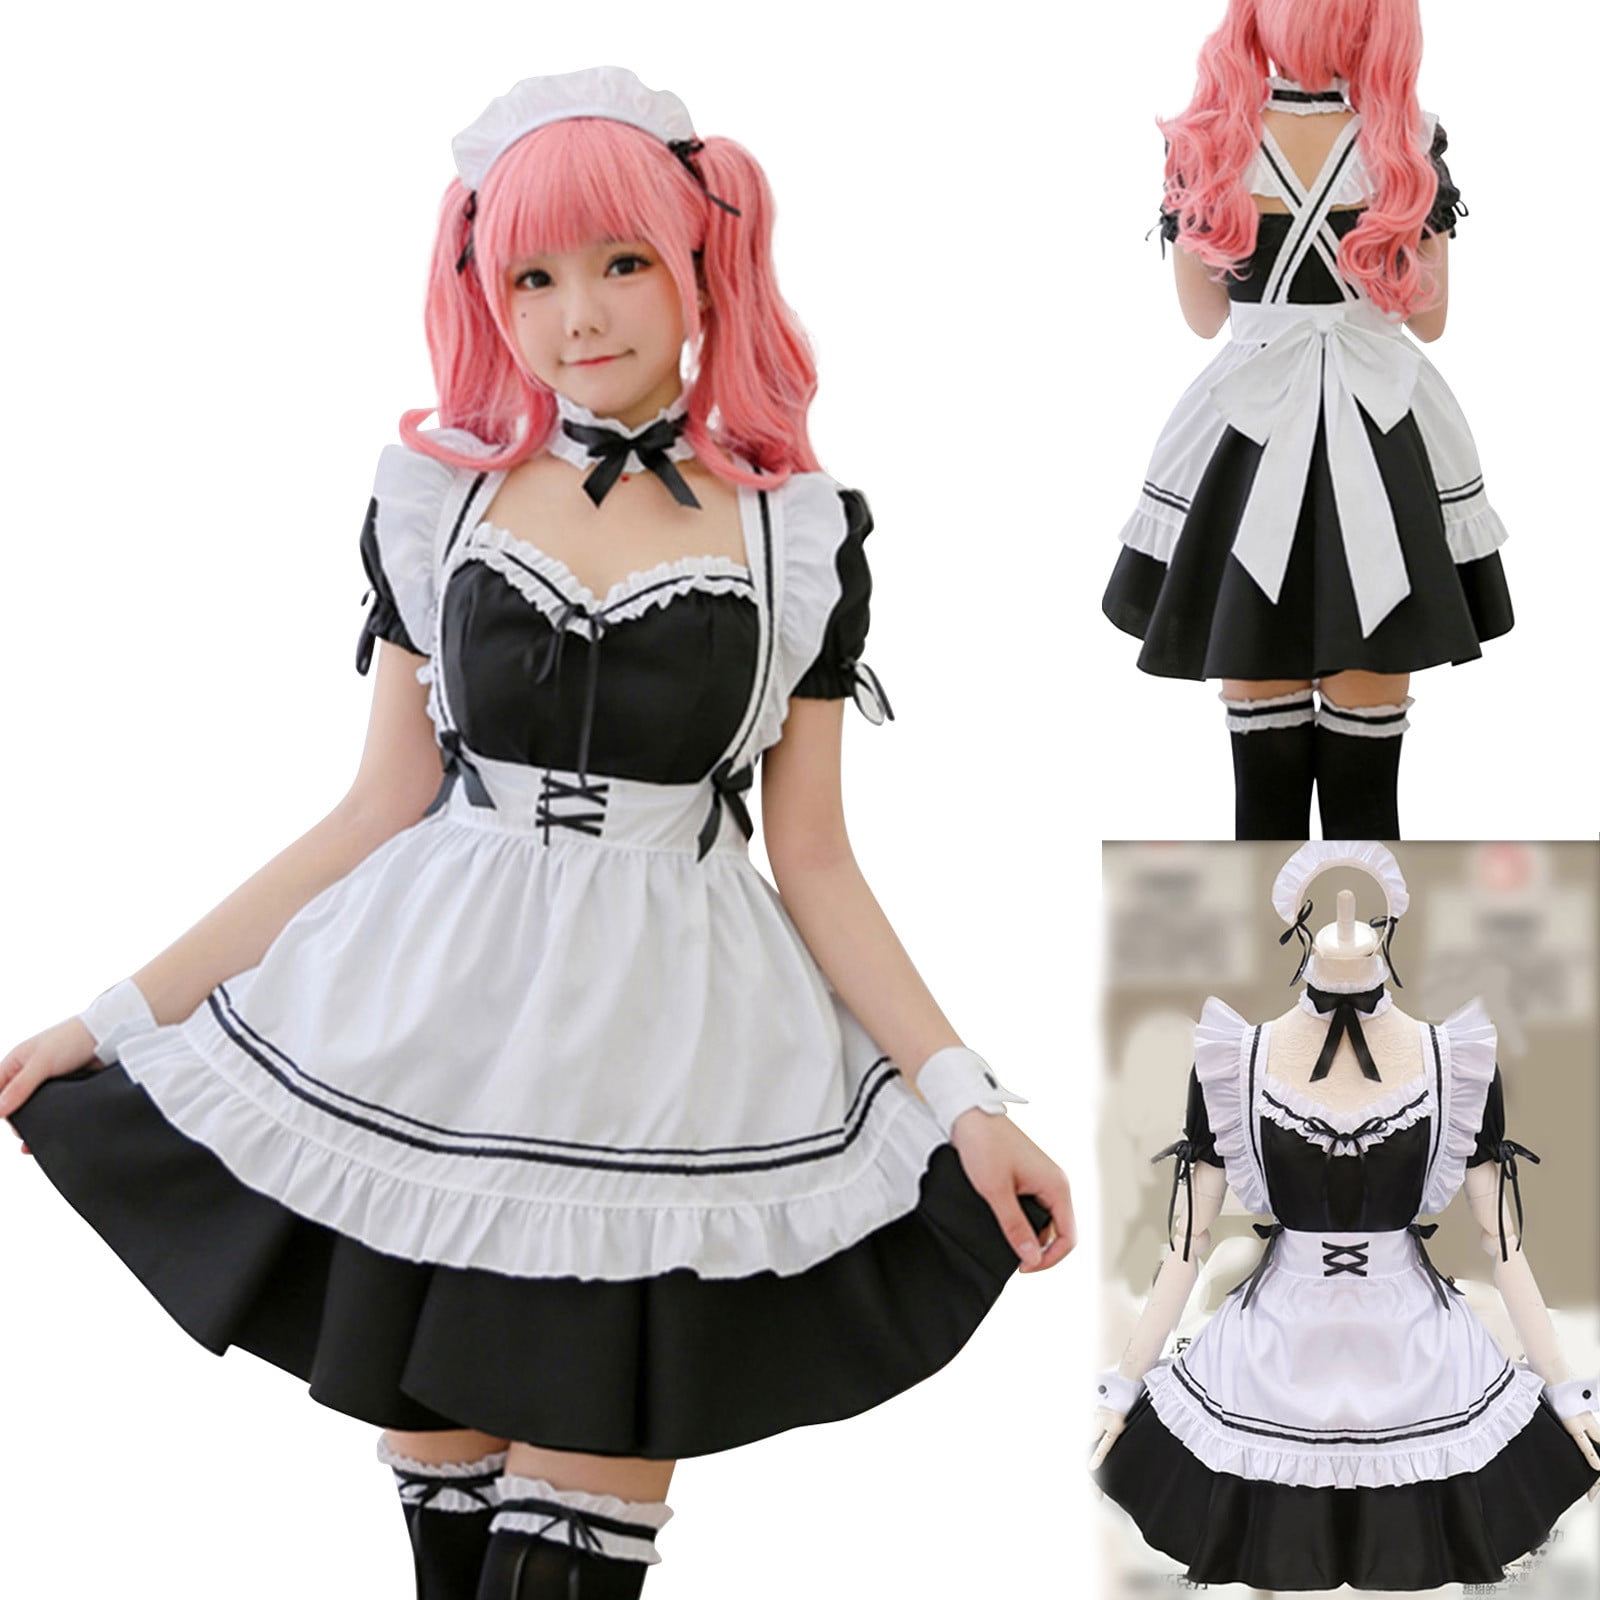 Japanese Maid Uniform Costume Lolita Bow Candy Pink Dress for Halloween Cosplay 